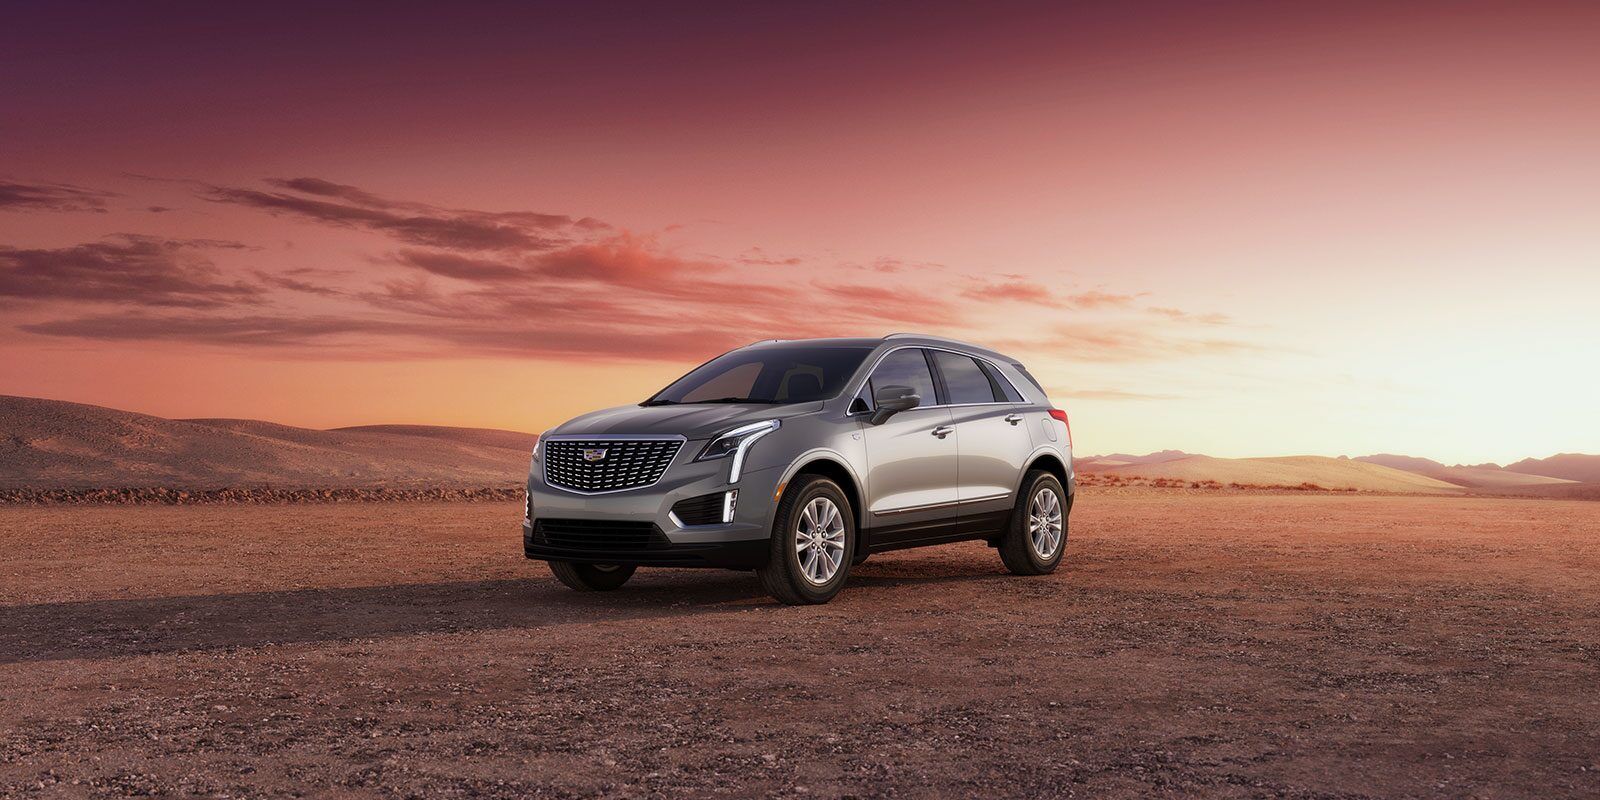 Front 3/4 view of the 2023 Cadillac XT5 on a deserted land.